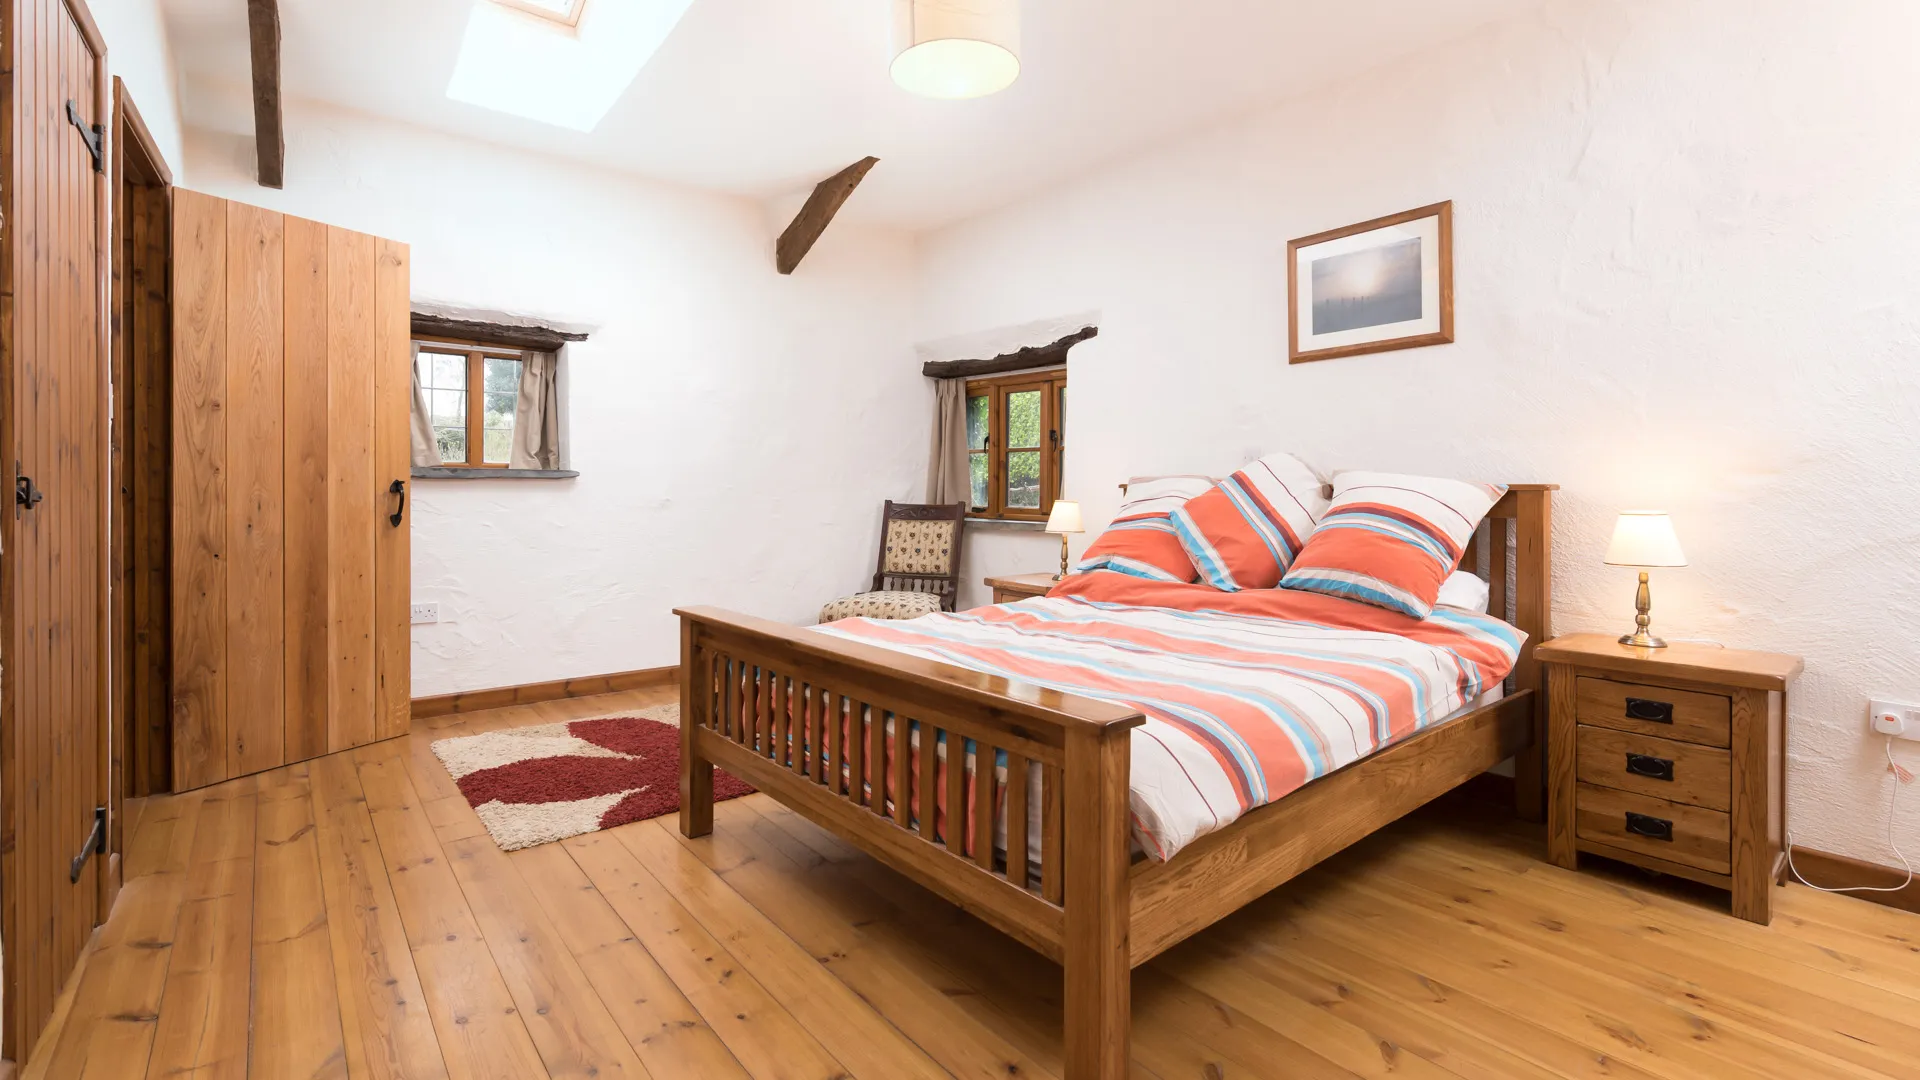 The Byre master bedroom